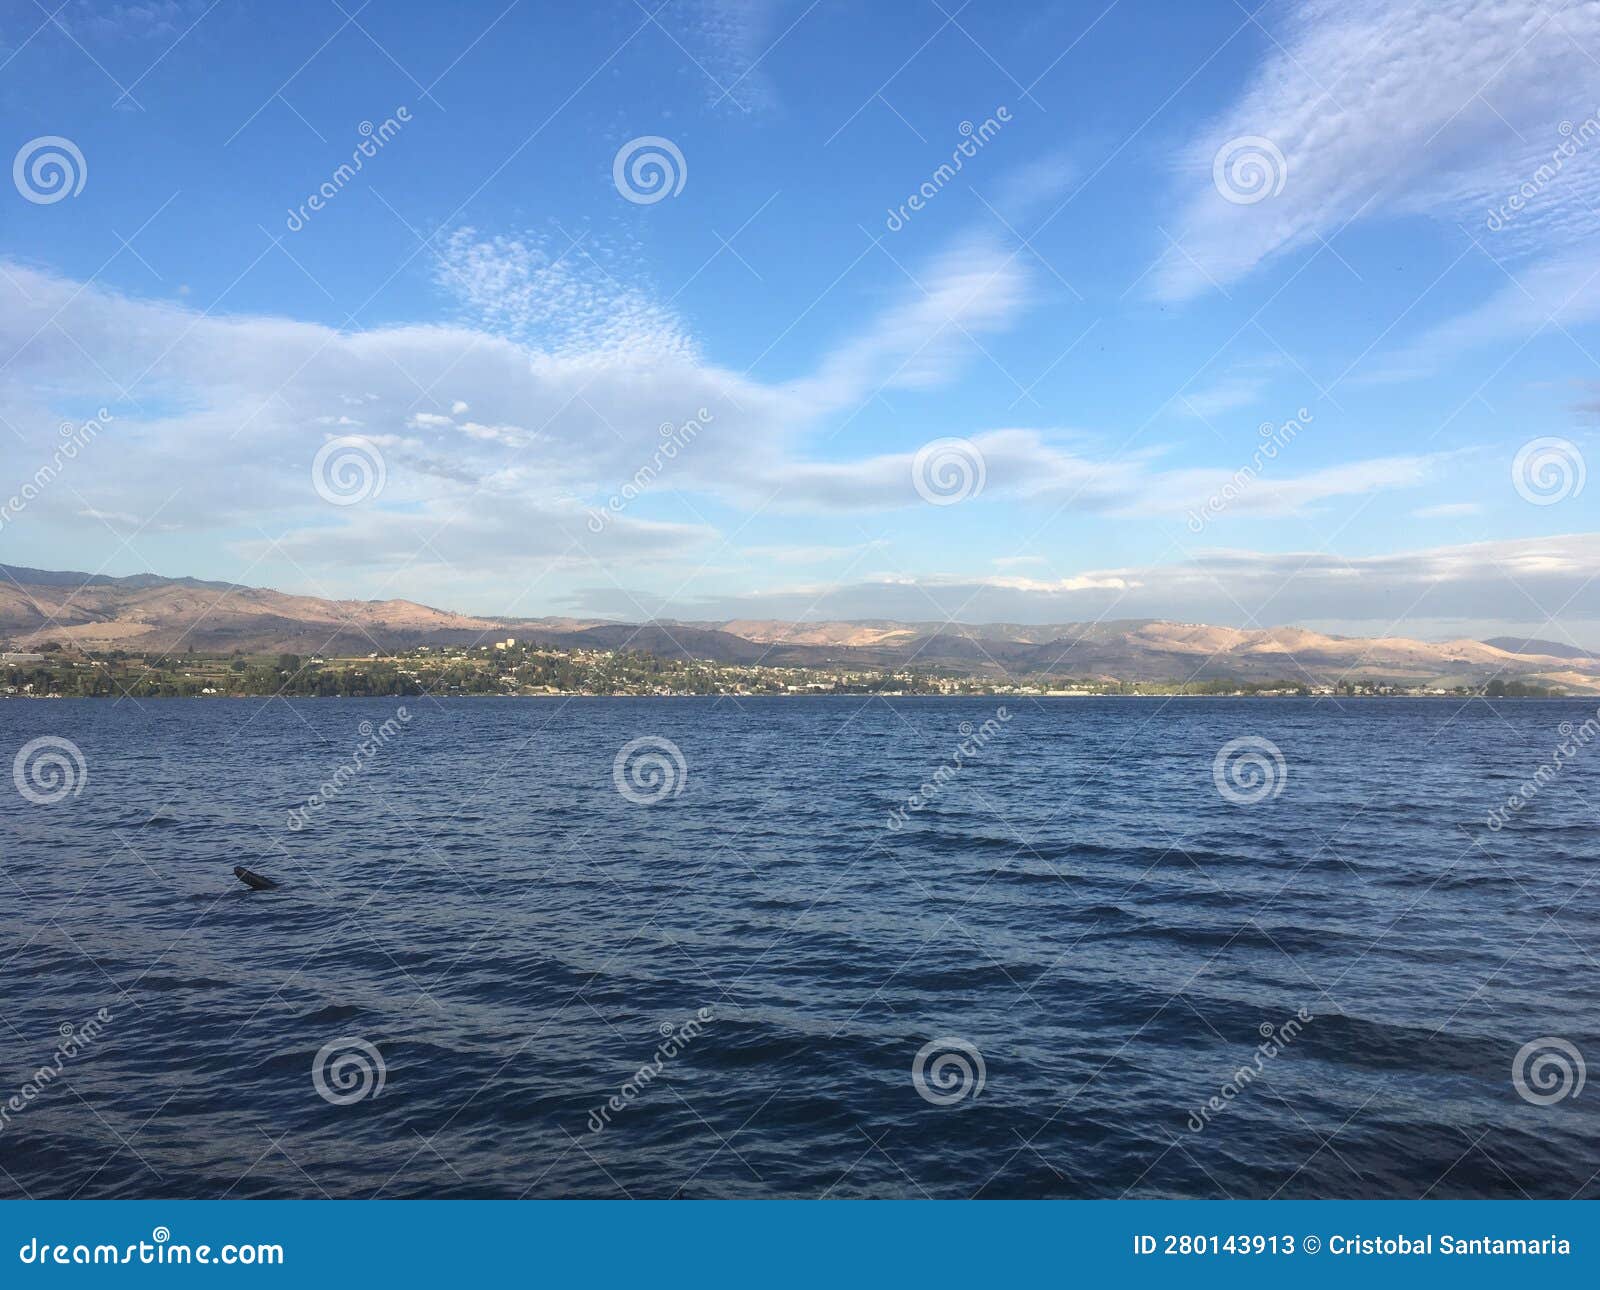 is a beautiful lake and landscape in northwest